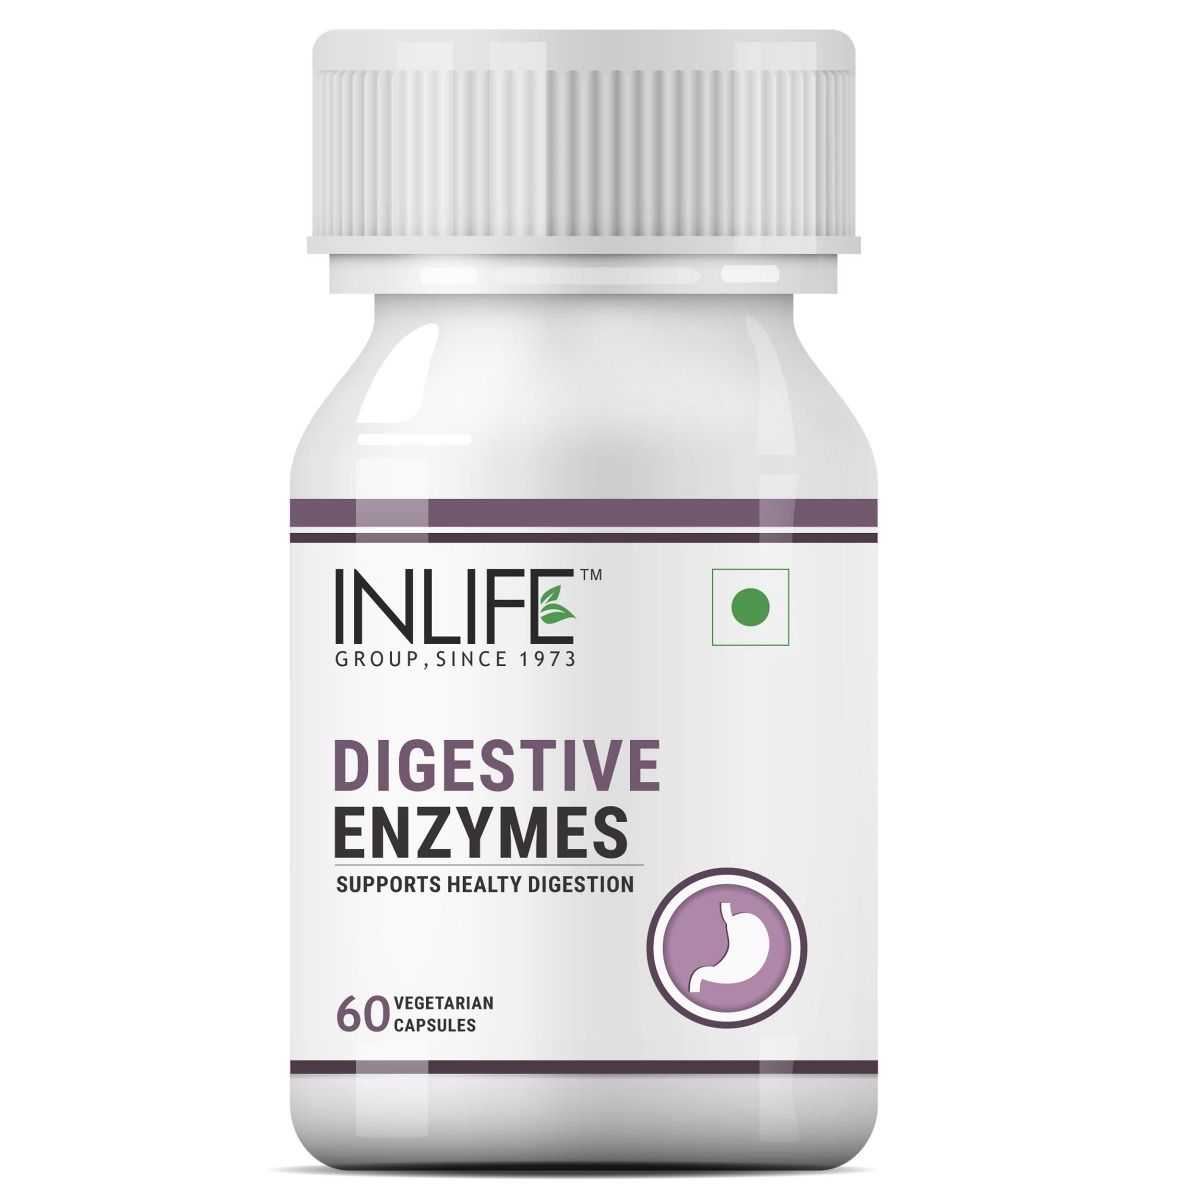 Inlife Digestive Enzymes, 60 Capsules, Pack of 1 